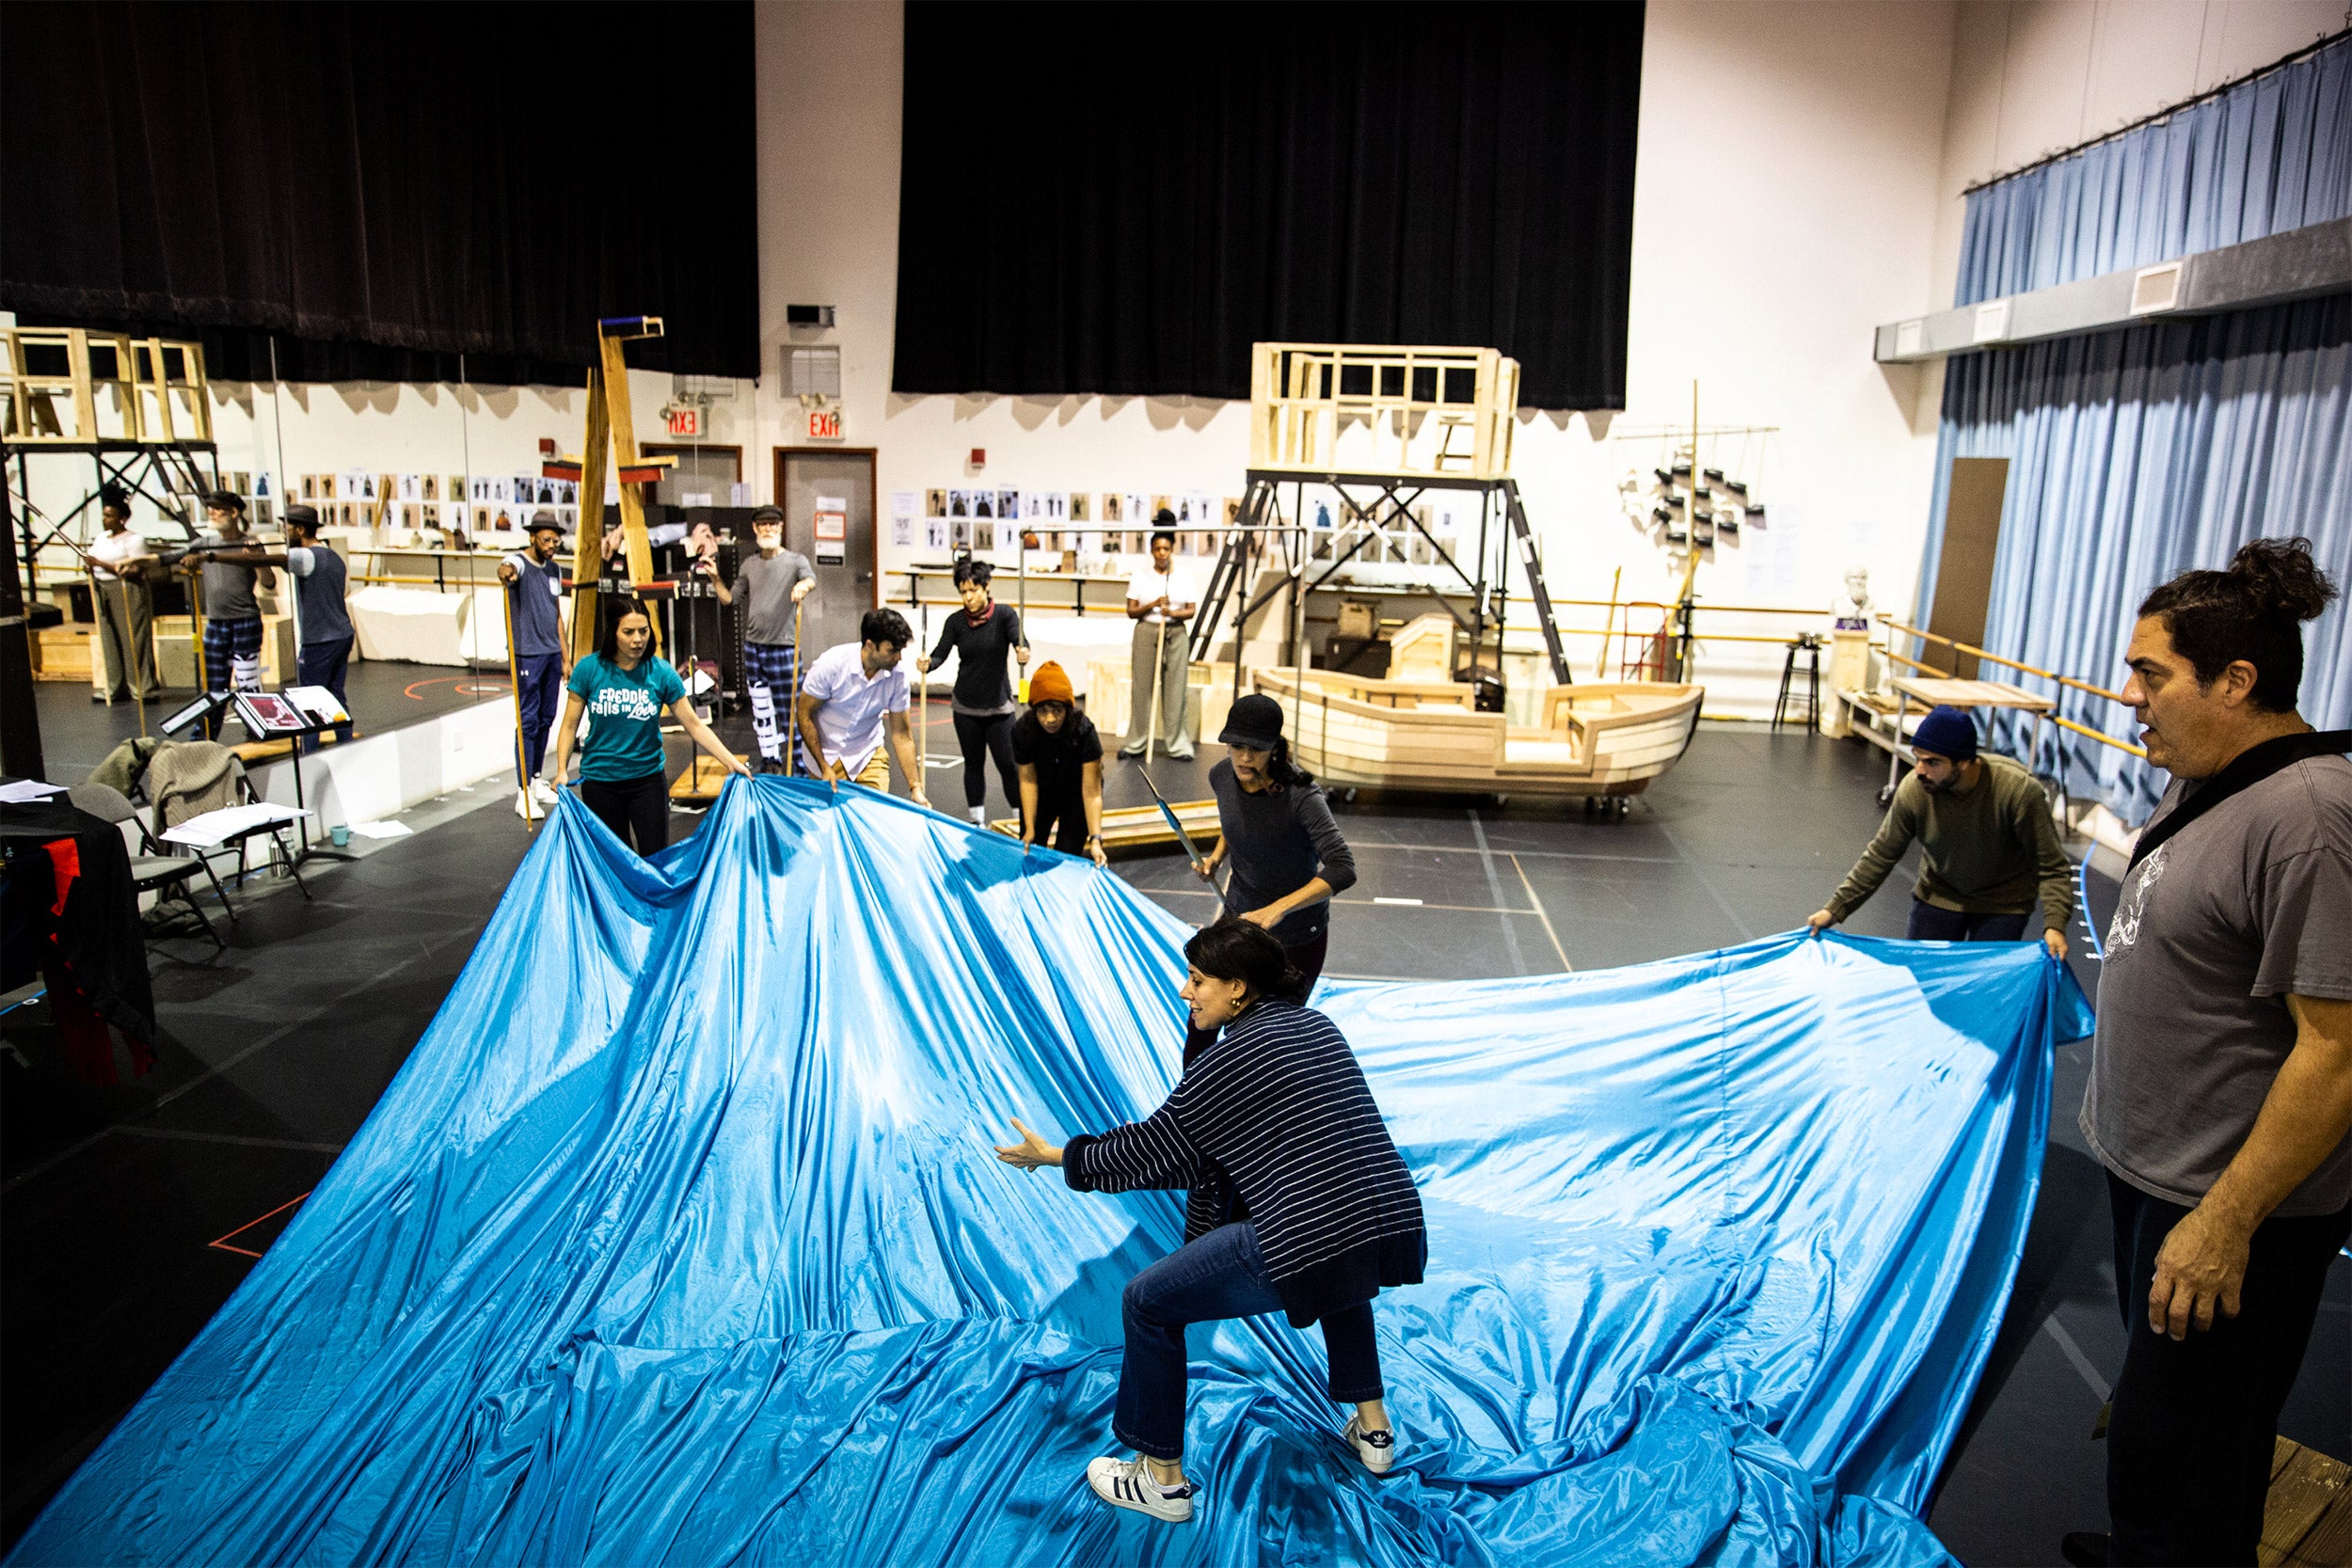 The cast rehearses in the studio, using a large blue sheet as the ocean.